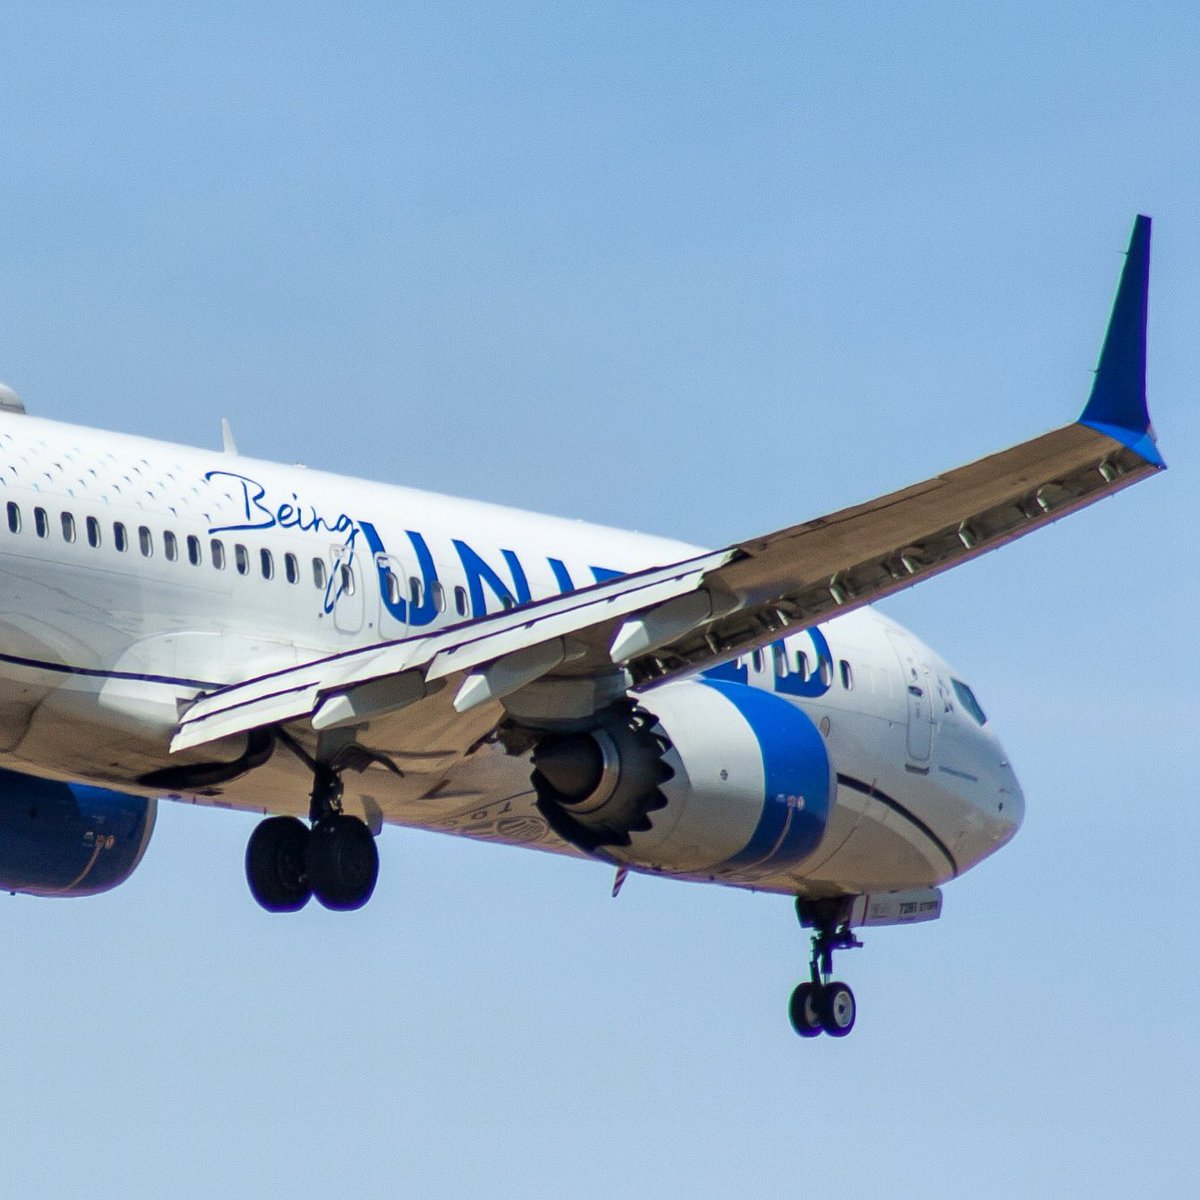 United Airlines
Boeing 737 MAX 8
Registration N27261
Being United special livery 
Calgary International Airport (YYC)

#yyc #avgeek #aviation #aviationlovers #aviationphotography #aviationlovers #planespotter #planespotting #photography #boeing #737max8 #unitedairlines